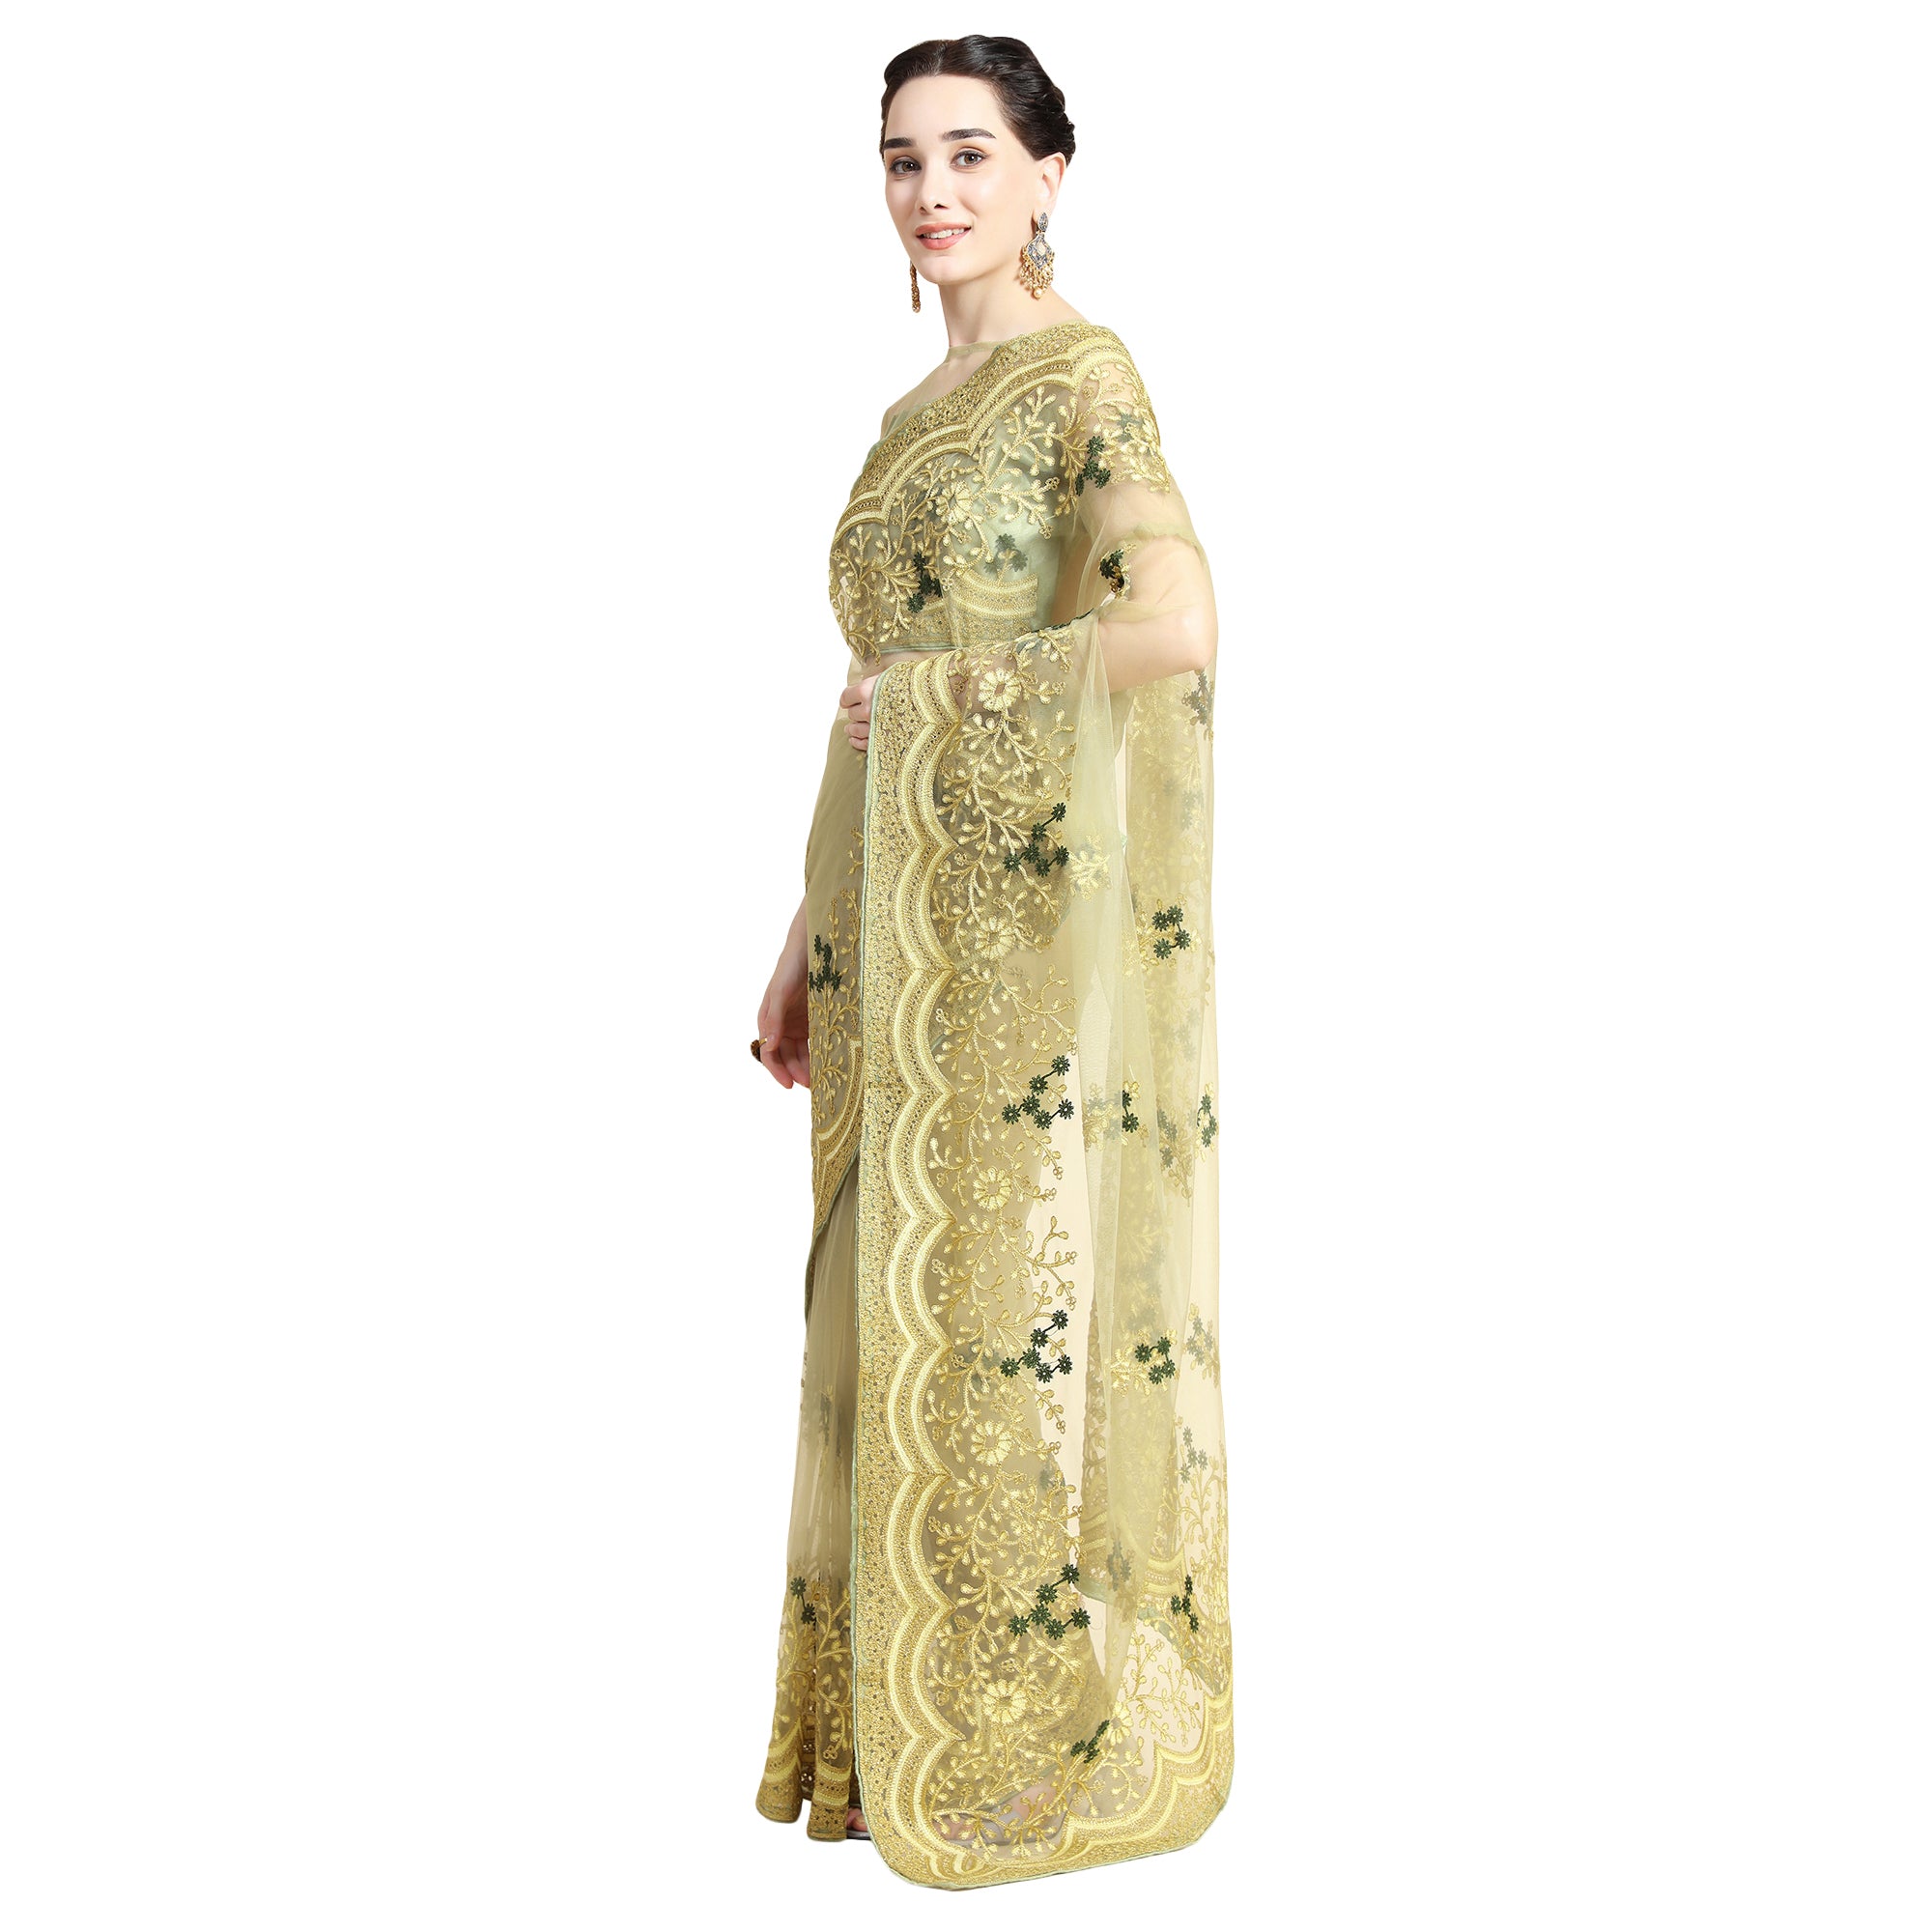 Women's Self Color Thread Embroidery Paty Wear Contemporary Net Saree With Blouse Piece (Mendhai Green) - NIMIDHYA